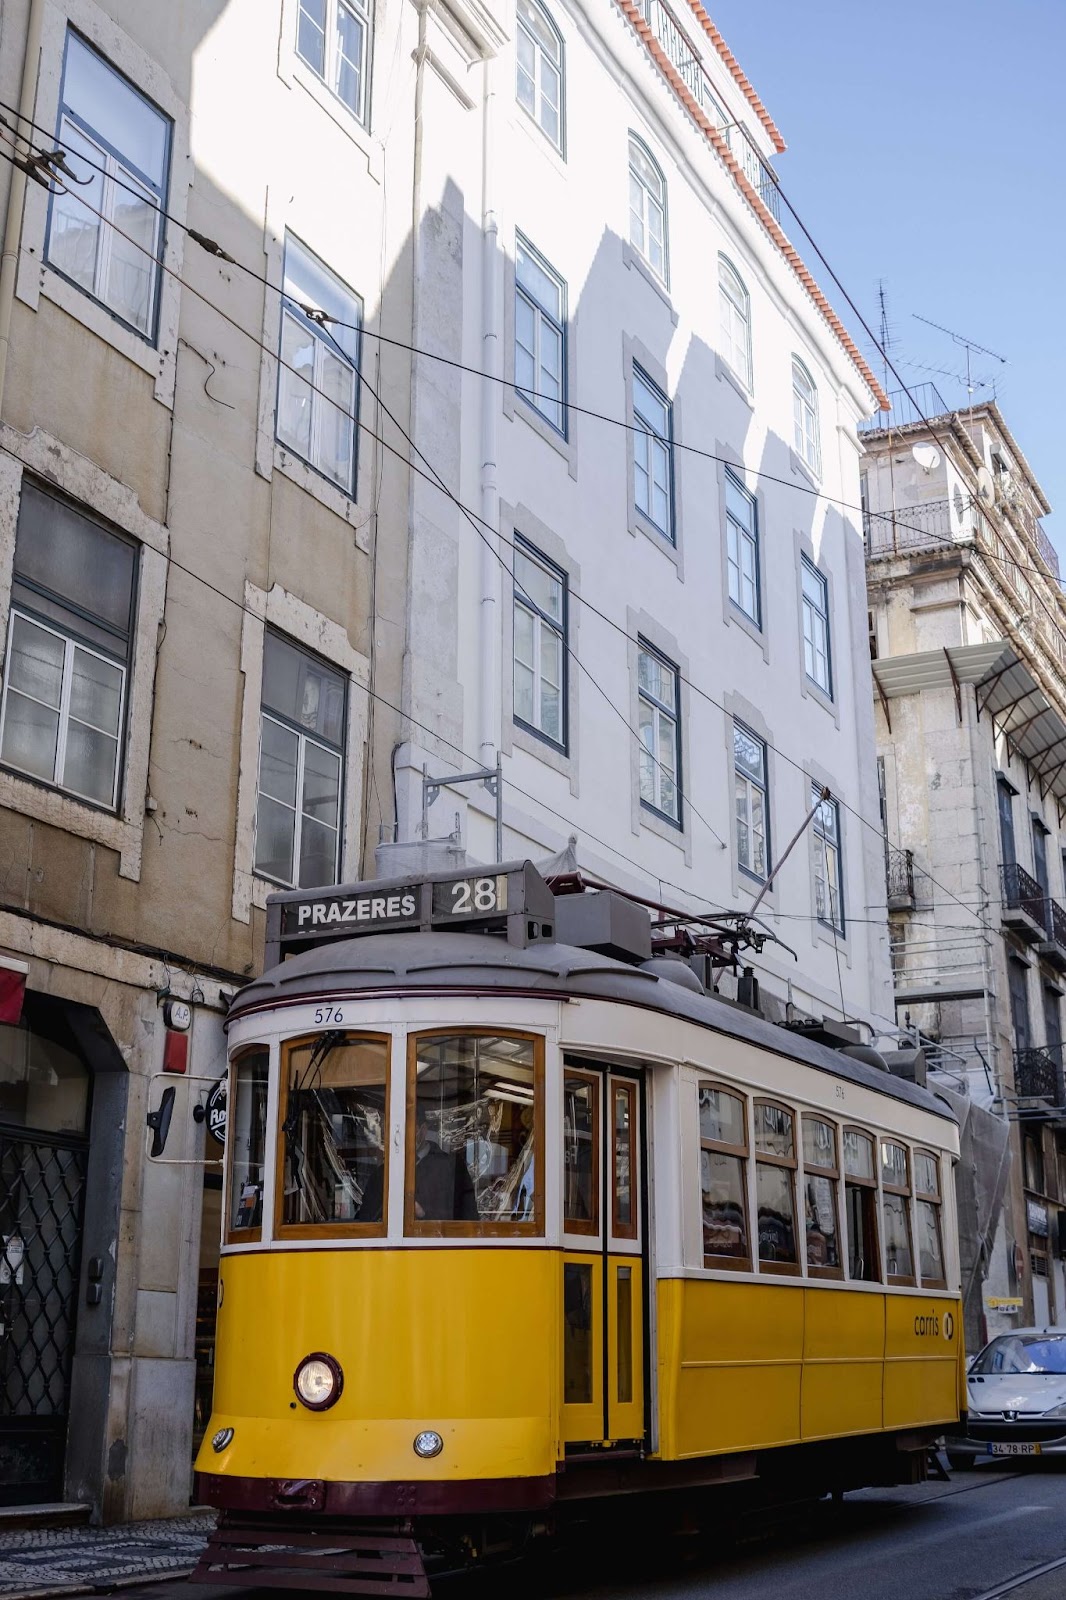 Tram 28, one of the oldest trams in Lisbon, yellow cab tram